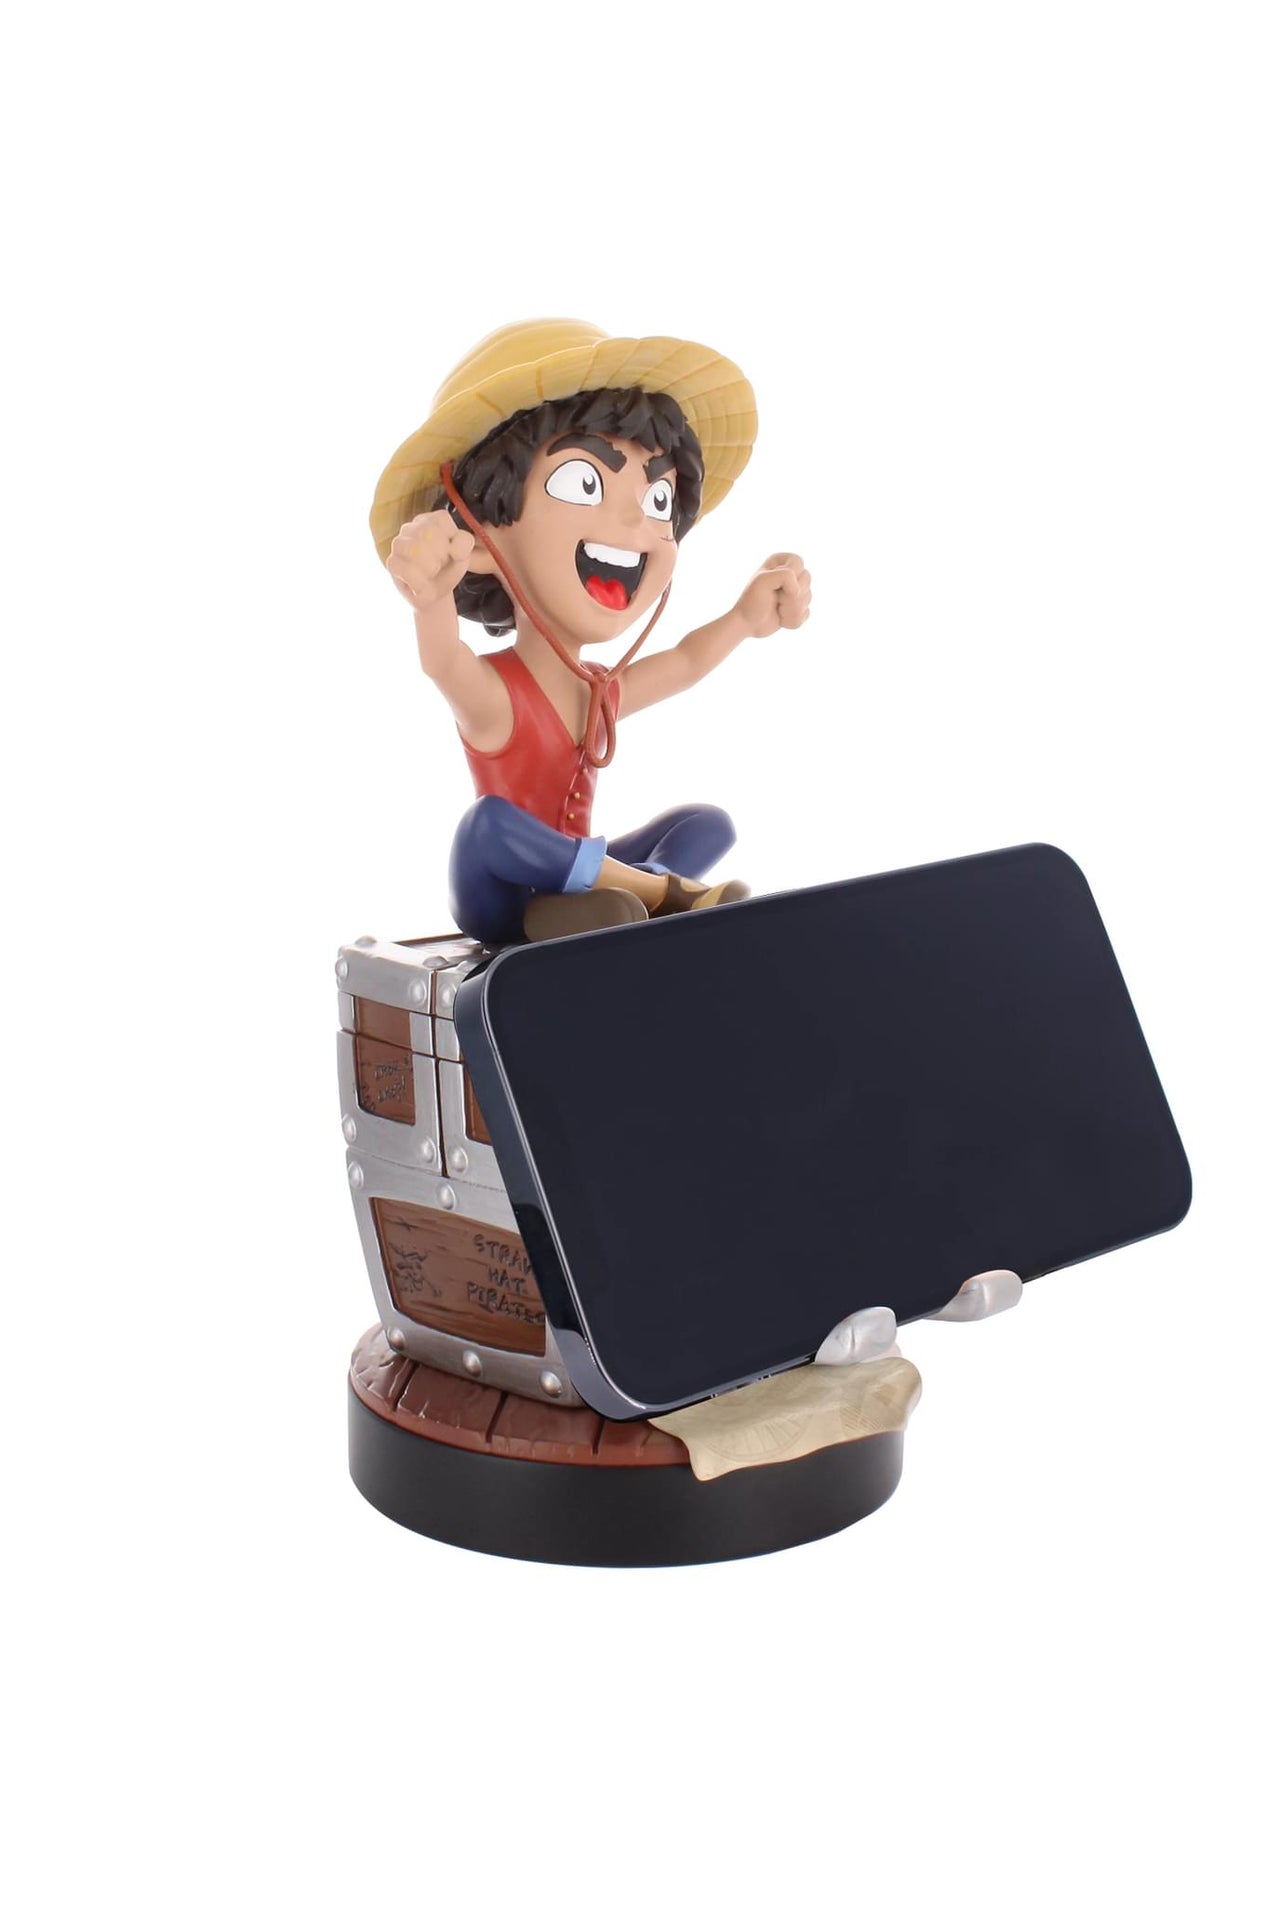 Netflix: Luffy Cable Guys Guys Original Controller and Phone Holder - EXG Pro